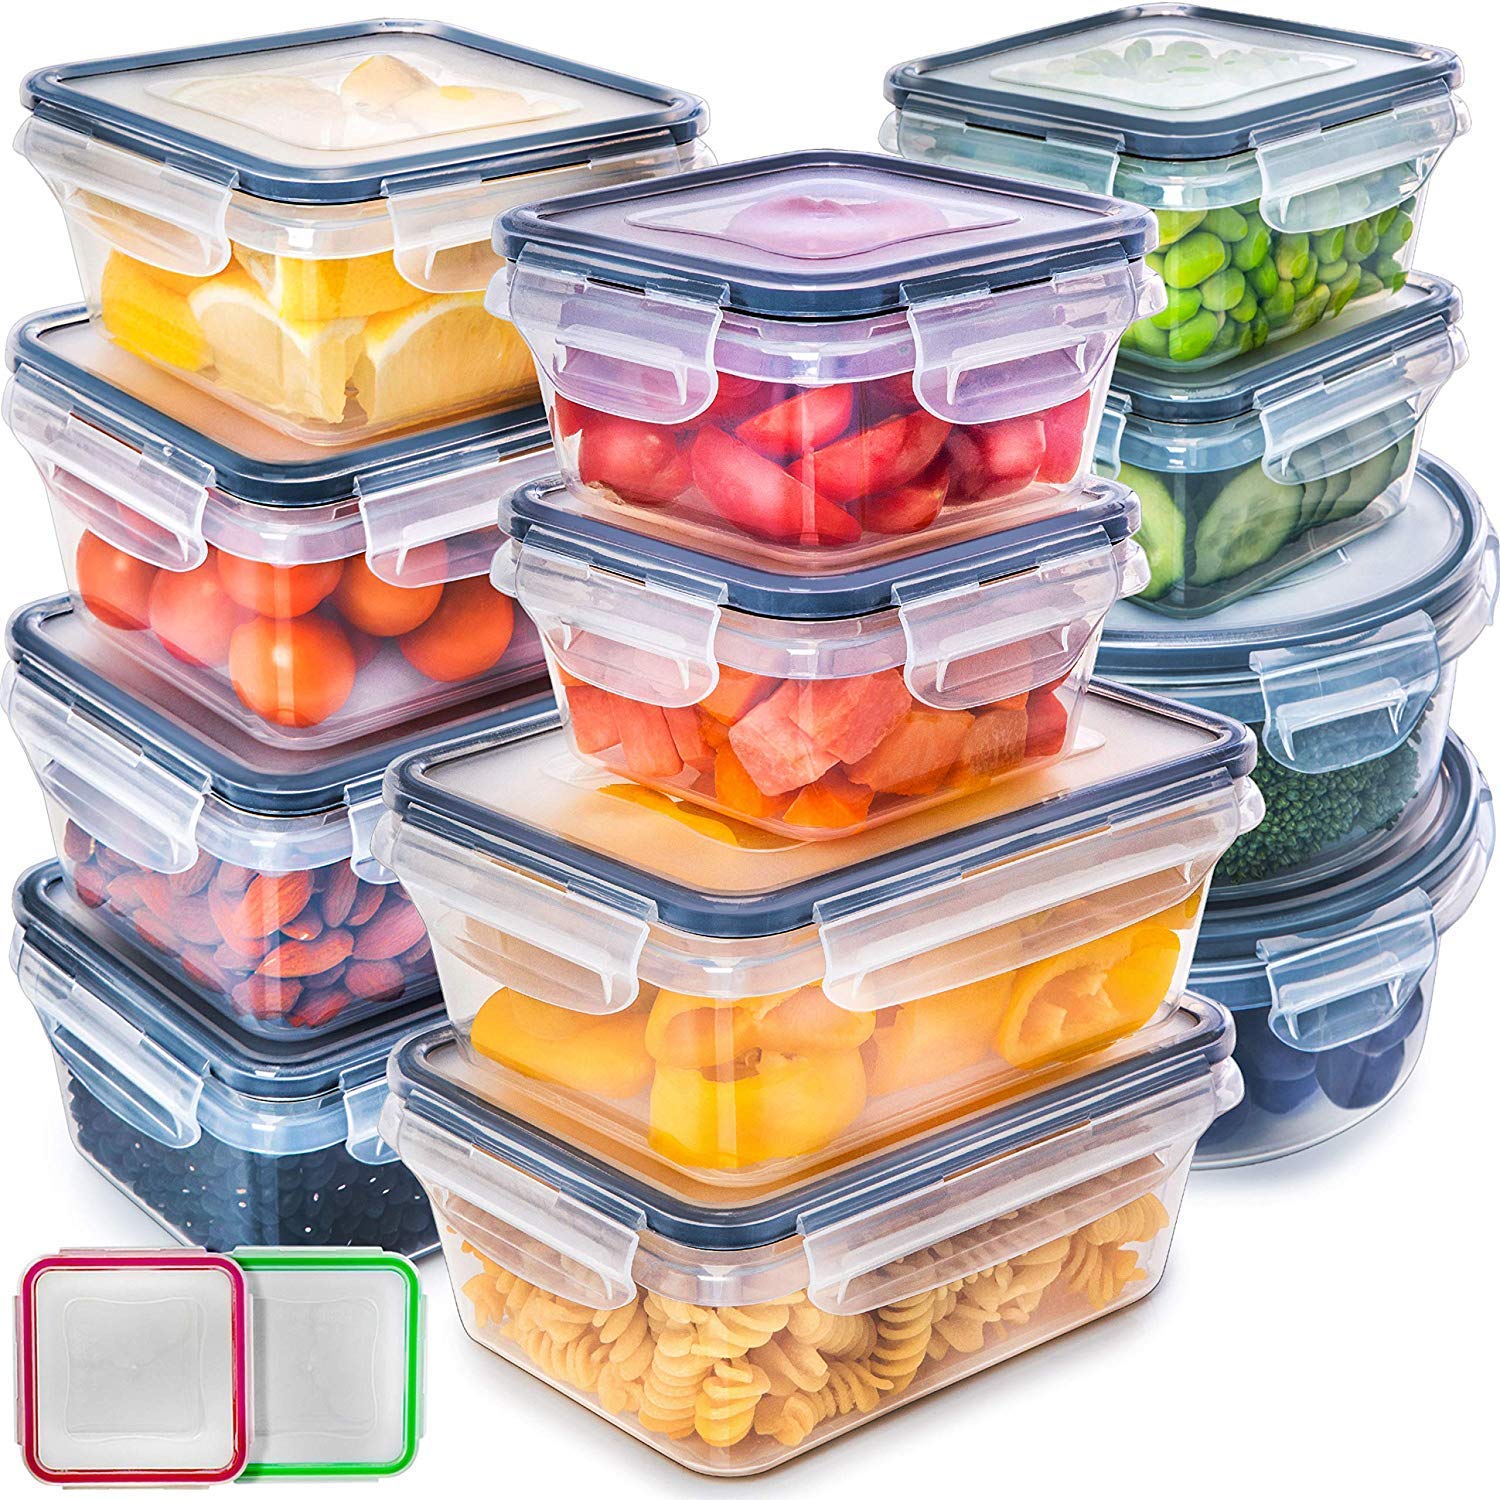 5 best containers to take your food to work and save money at lunch